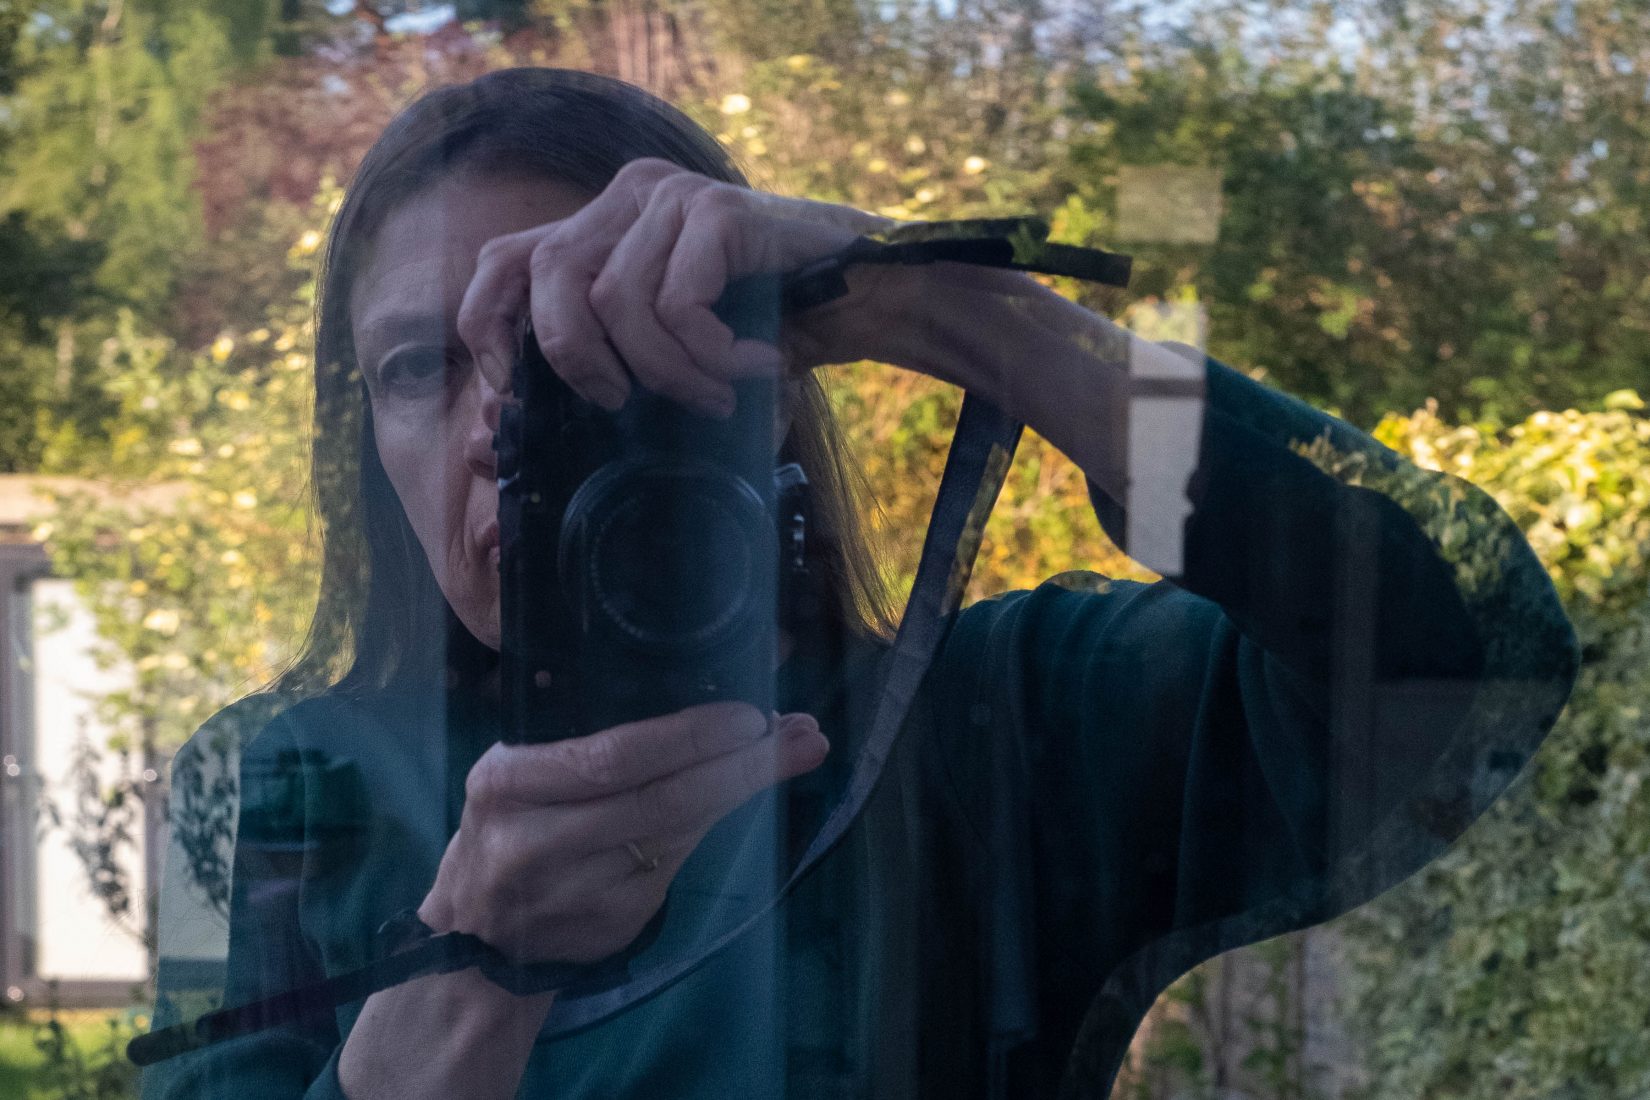 Karren, a photographer, holds the camera in front of her face to take a self portrait using the reflection of a window, when experimenting in lockdown April 2020